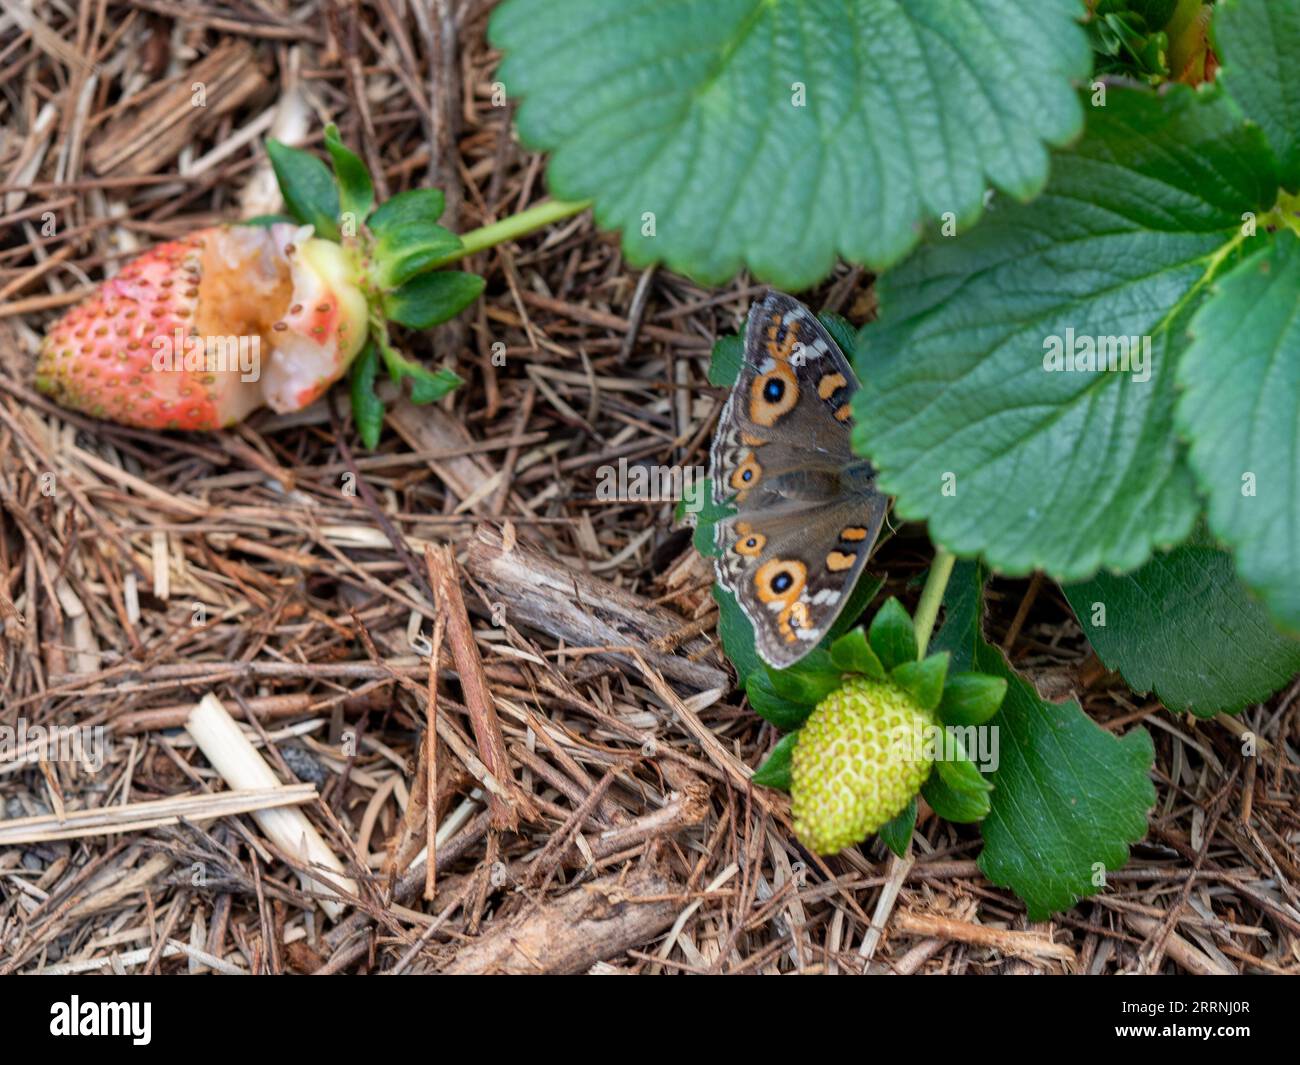 A Meadow Argus Butterfly resting near a partially eaten strawberry in the garden, probably unrelated,  green leaves Stock Photo